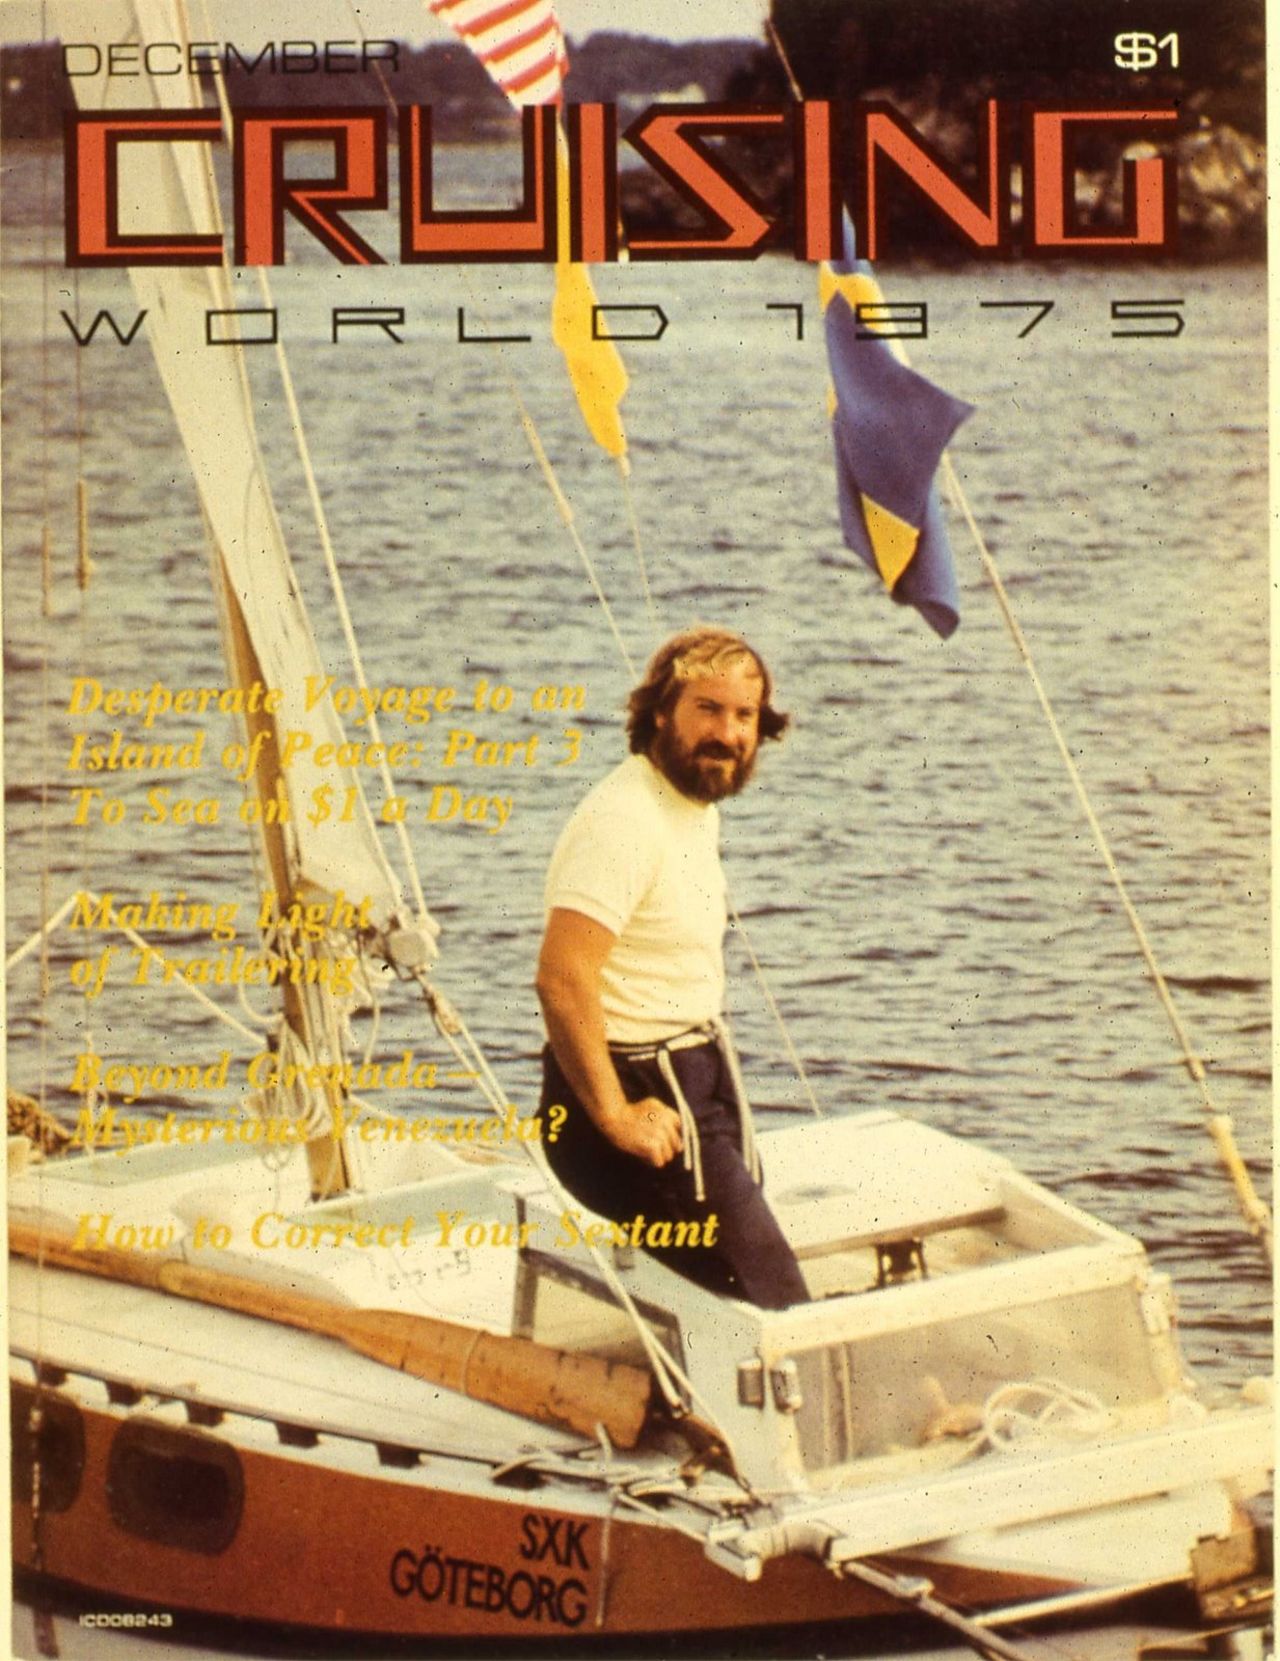 The world-renowned boat builder wrote articles about his adventures for yachting magazine "Cruising World" for more than 20 years, appearing on its cover in December 1975. 